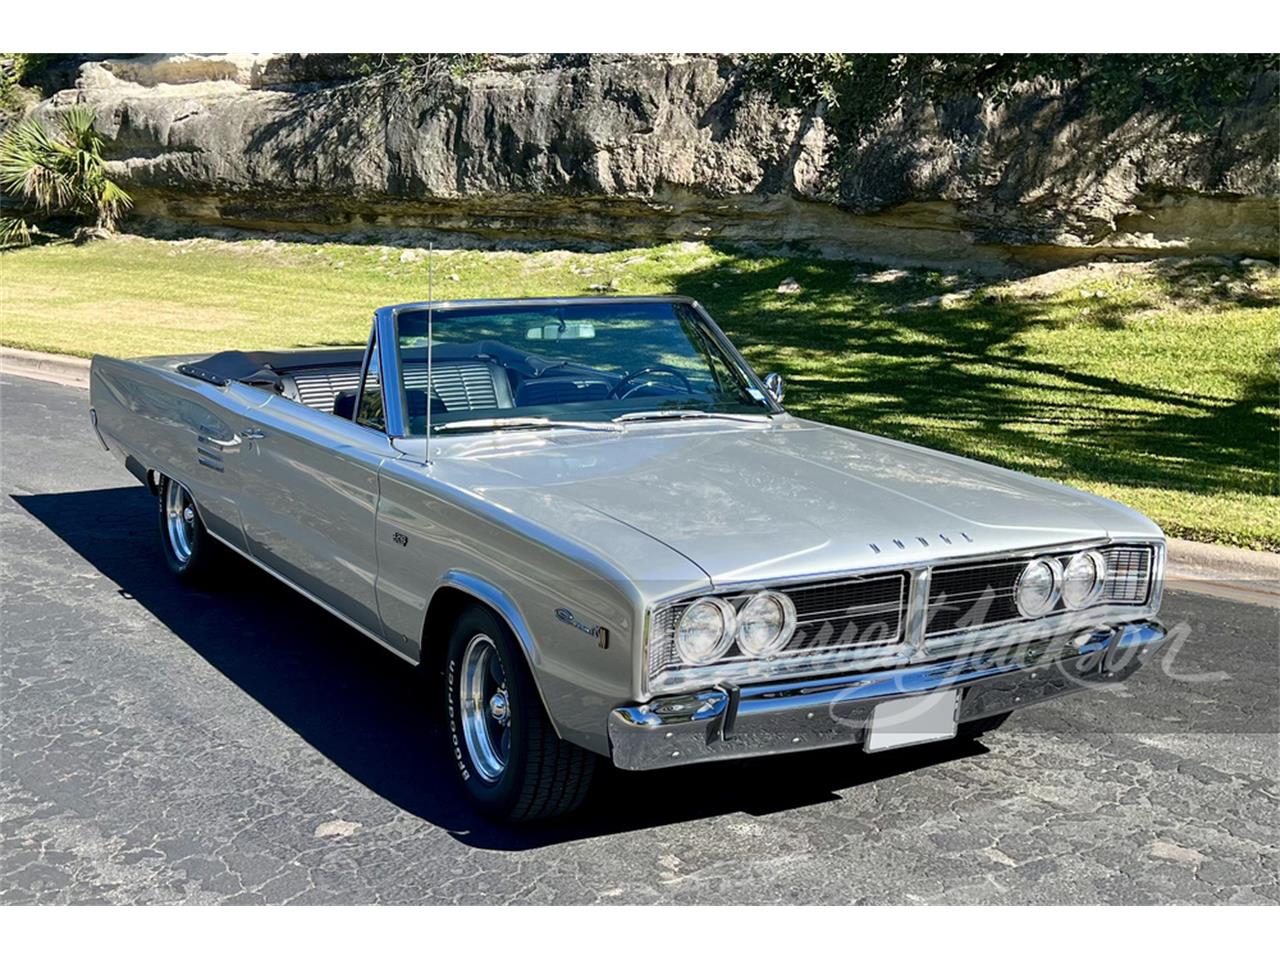 For Sale at Auction: 1966 Dodge Coronet 500 in Scottsdale, Arizona for sale in Scottsdale, AZ